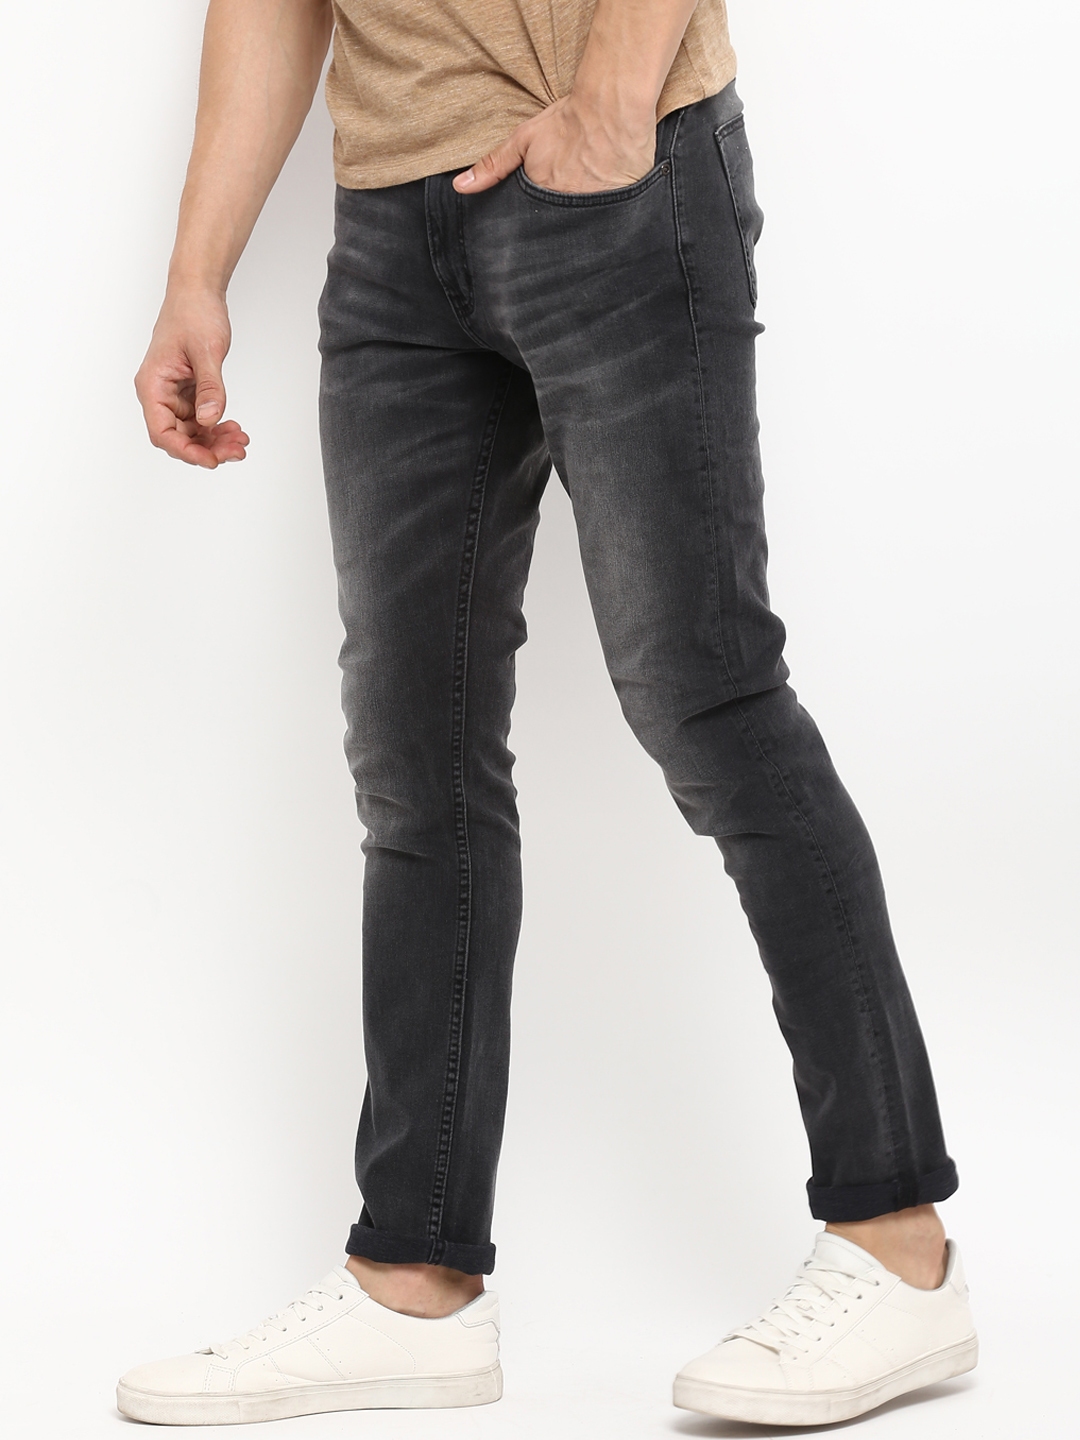 red tape slim fit jeans